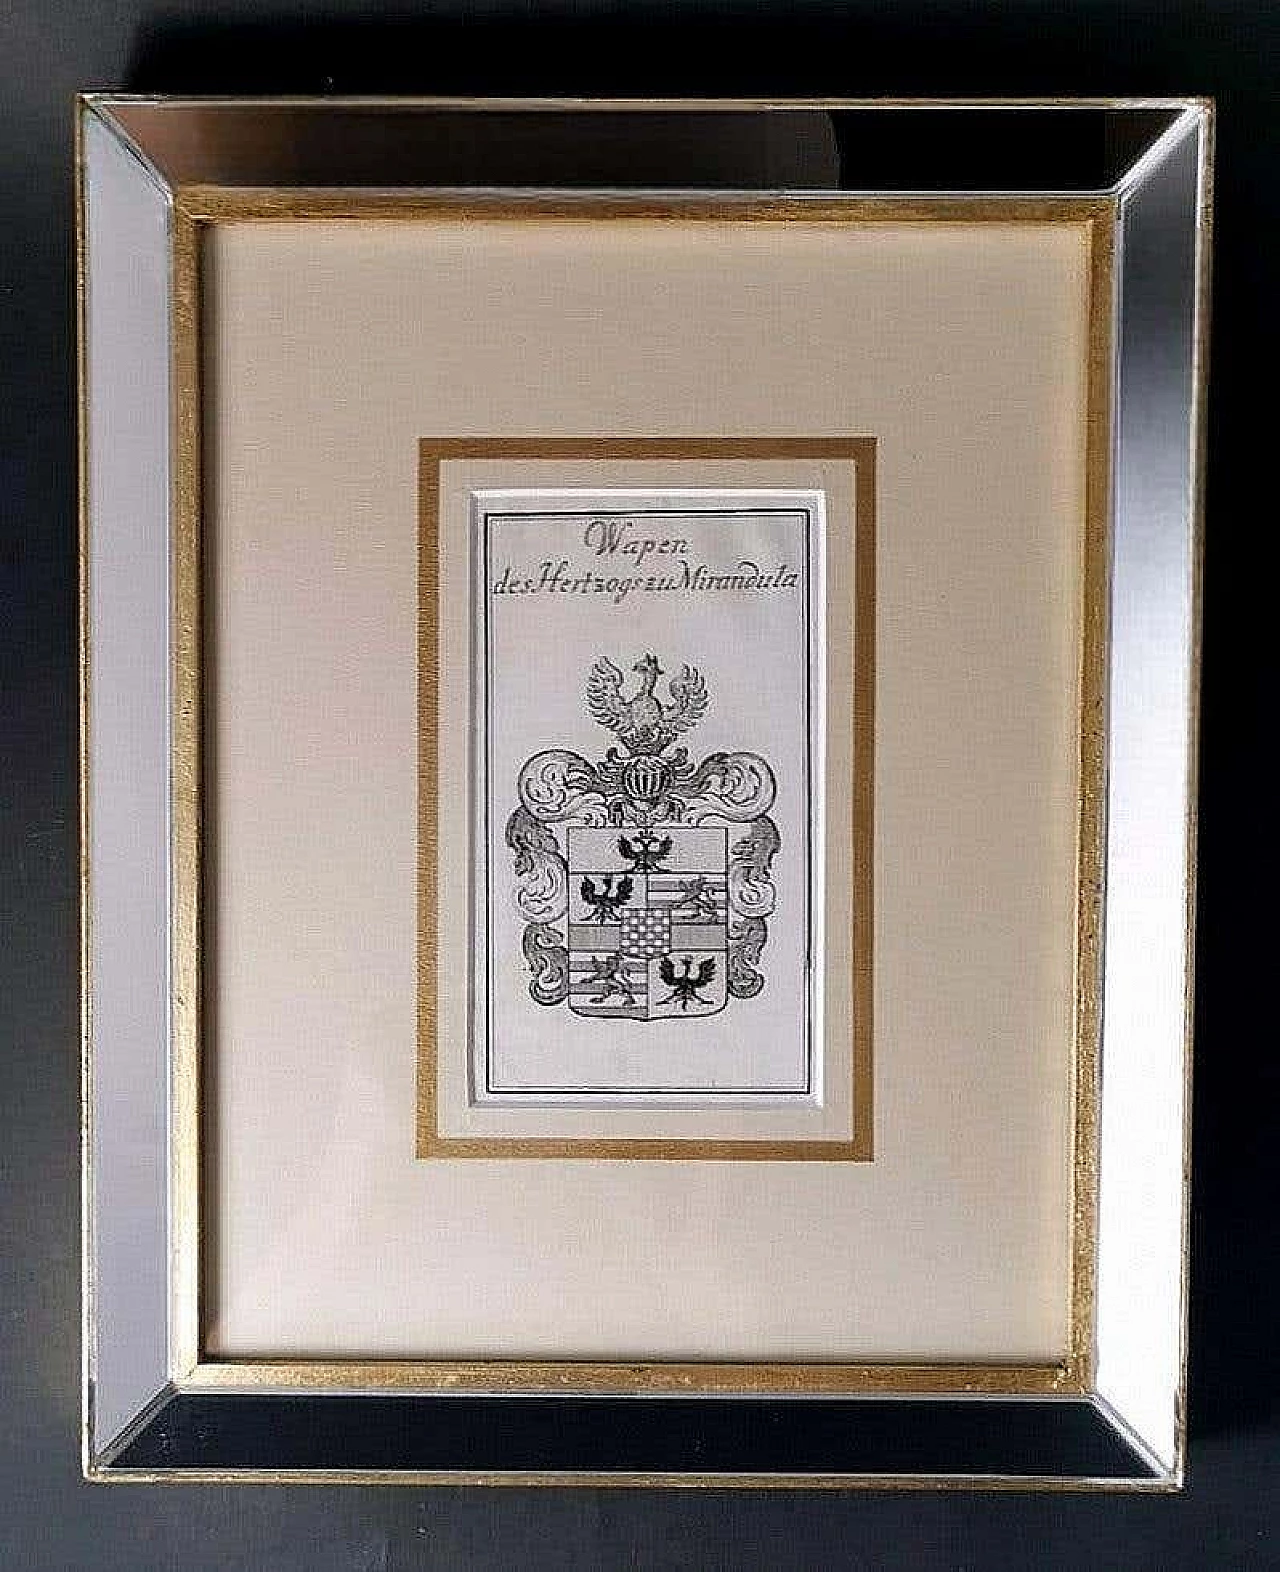 Engraved Dutch print depicting the coat of arms of the Dukes of Mirandola with mirrored frame, 17th century 1